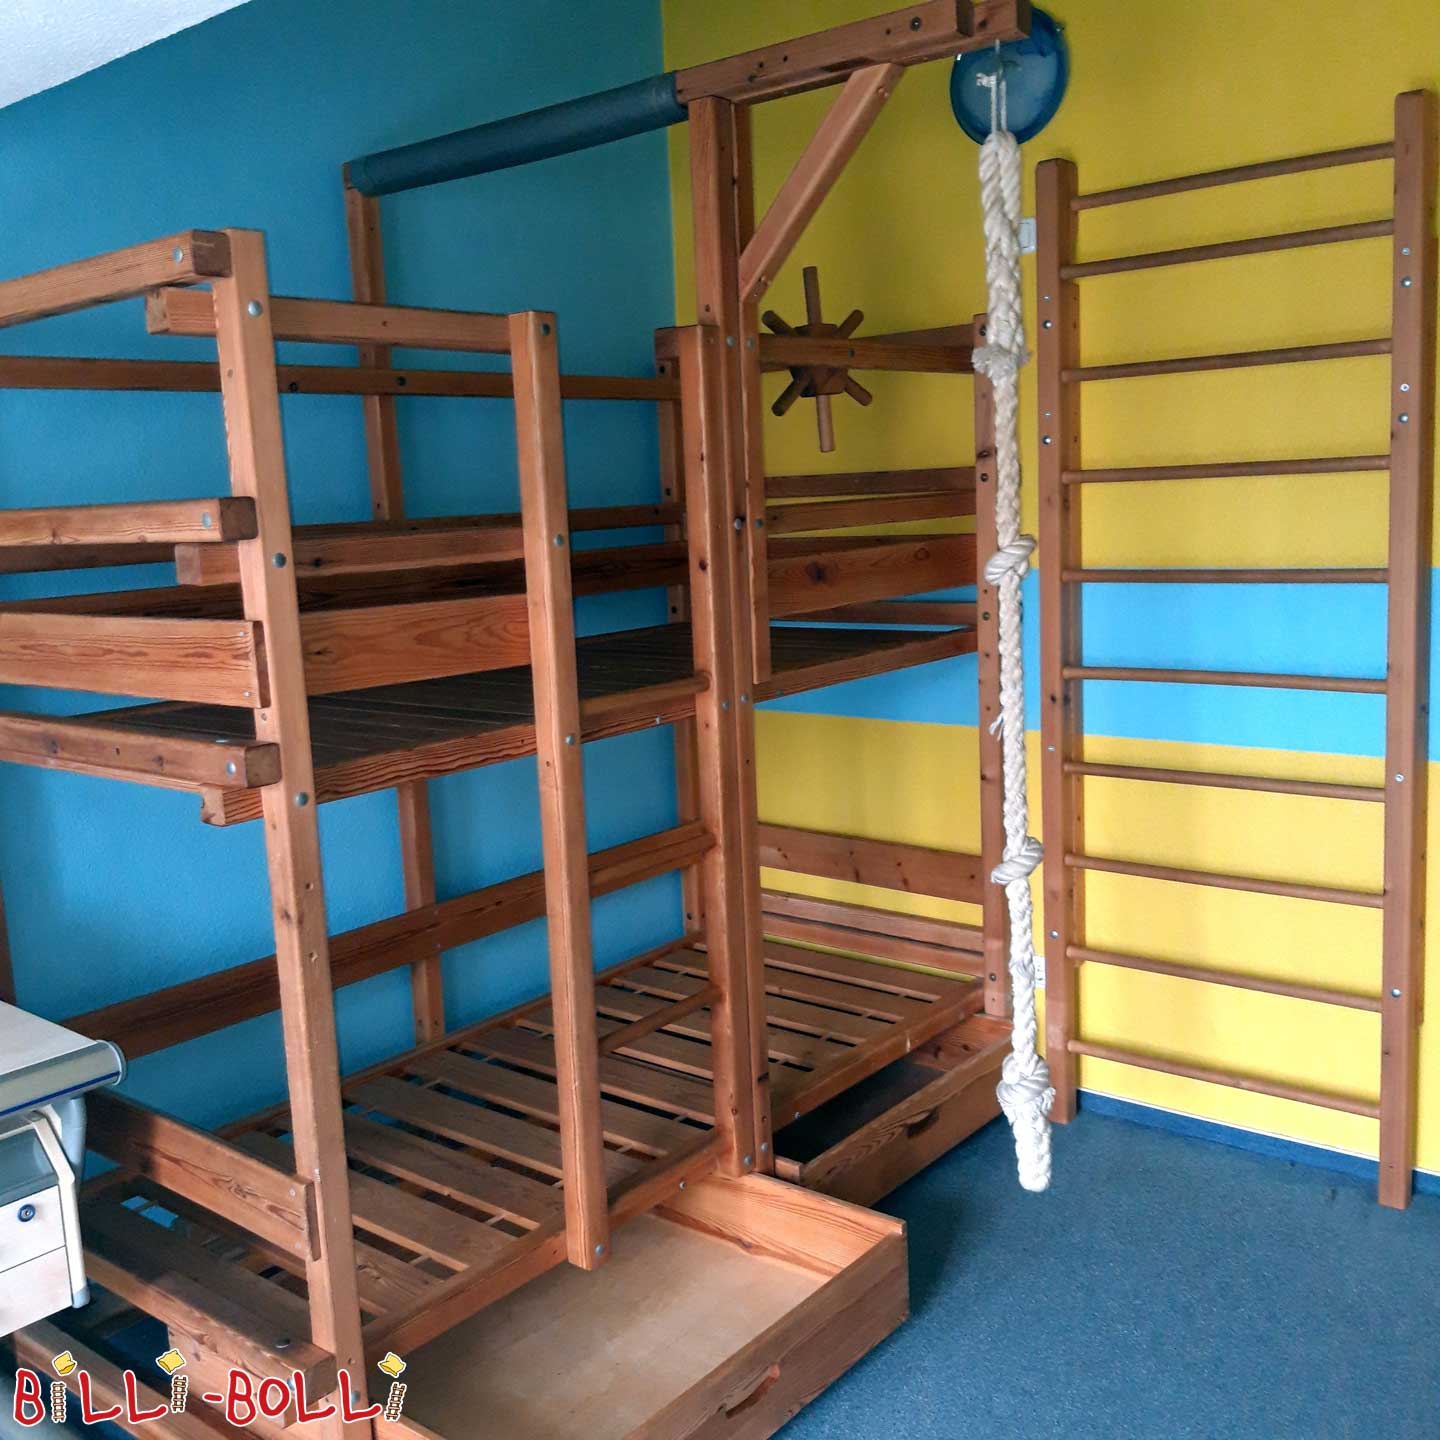 Gullibo bunk bed (Category: second hand bunk bed)